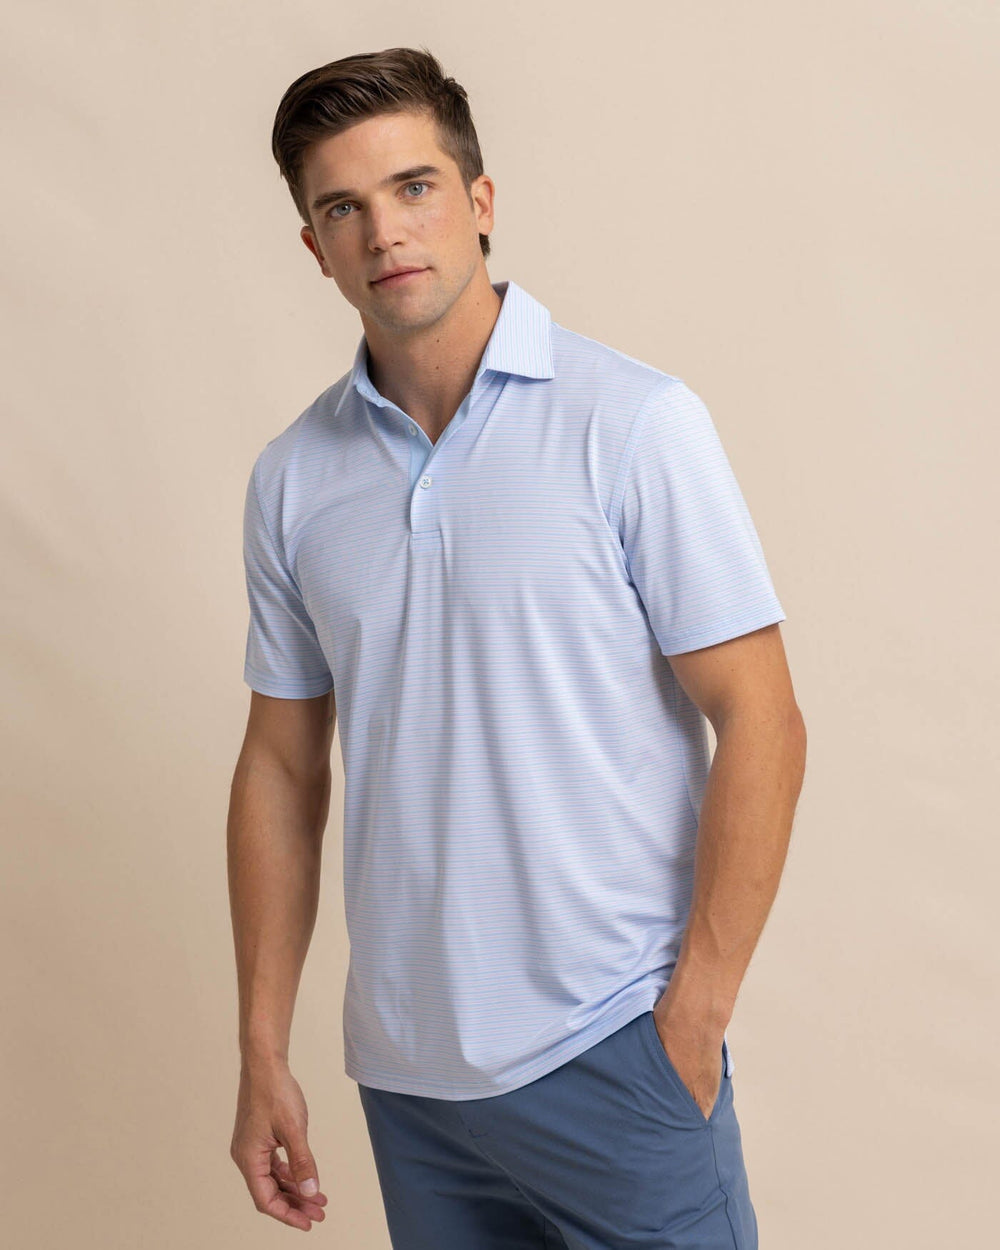 The front view of the Southern Tide Driver Verdae Stripe Polo by Southern Tide - Orchid Petal